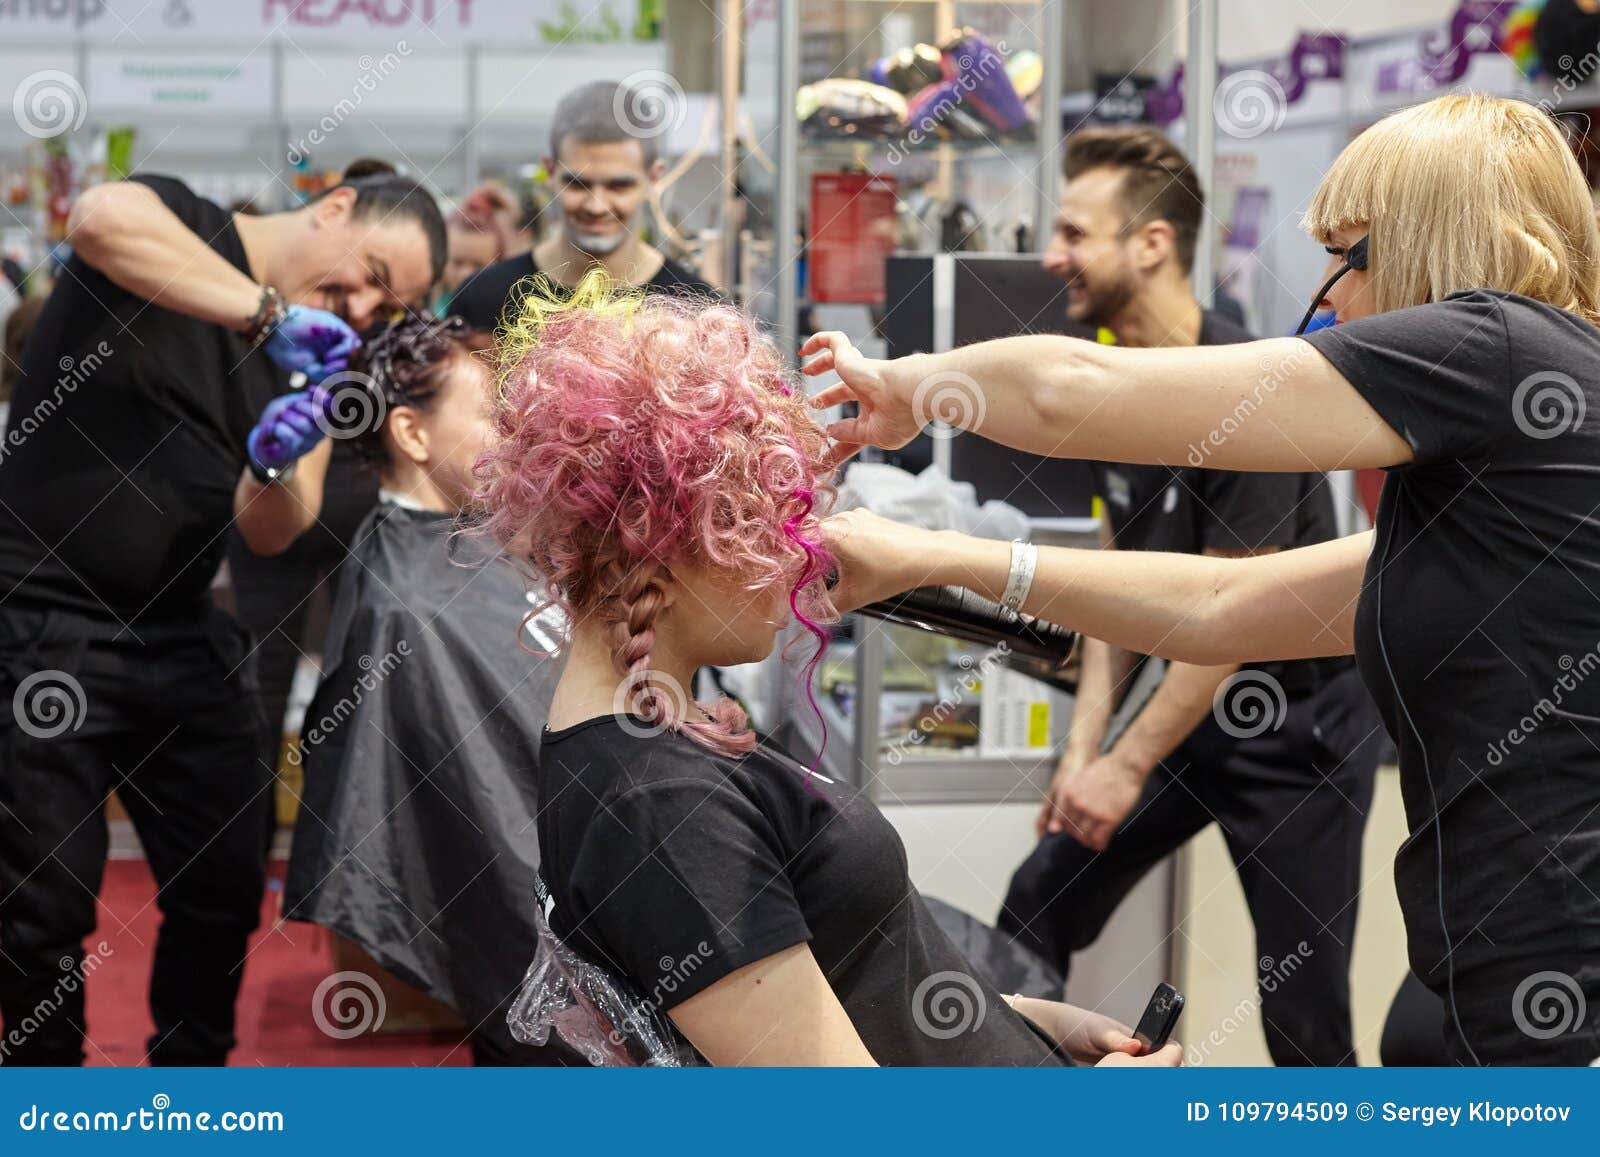 Training Of Hairdressers For Creating Colorful Creative Hairstyles